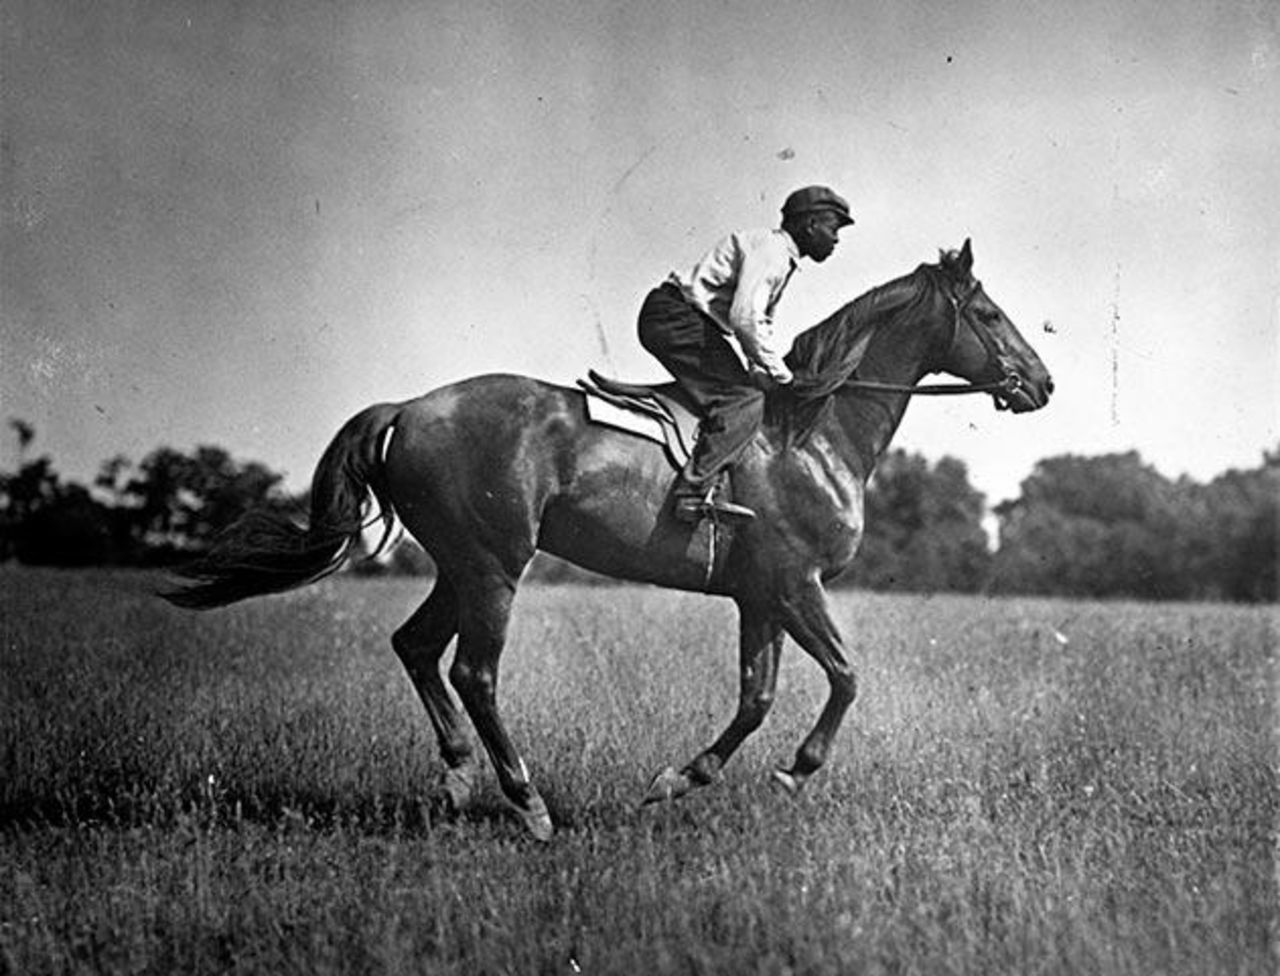 American horse Man o' War won 20 of 21 races he started, raking in more than $7.5 million in today's equivalent prize money. For six races as a two-year-old, his handicap of 130 pounds was one of the heaviest ever carried.